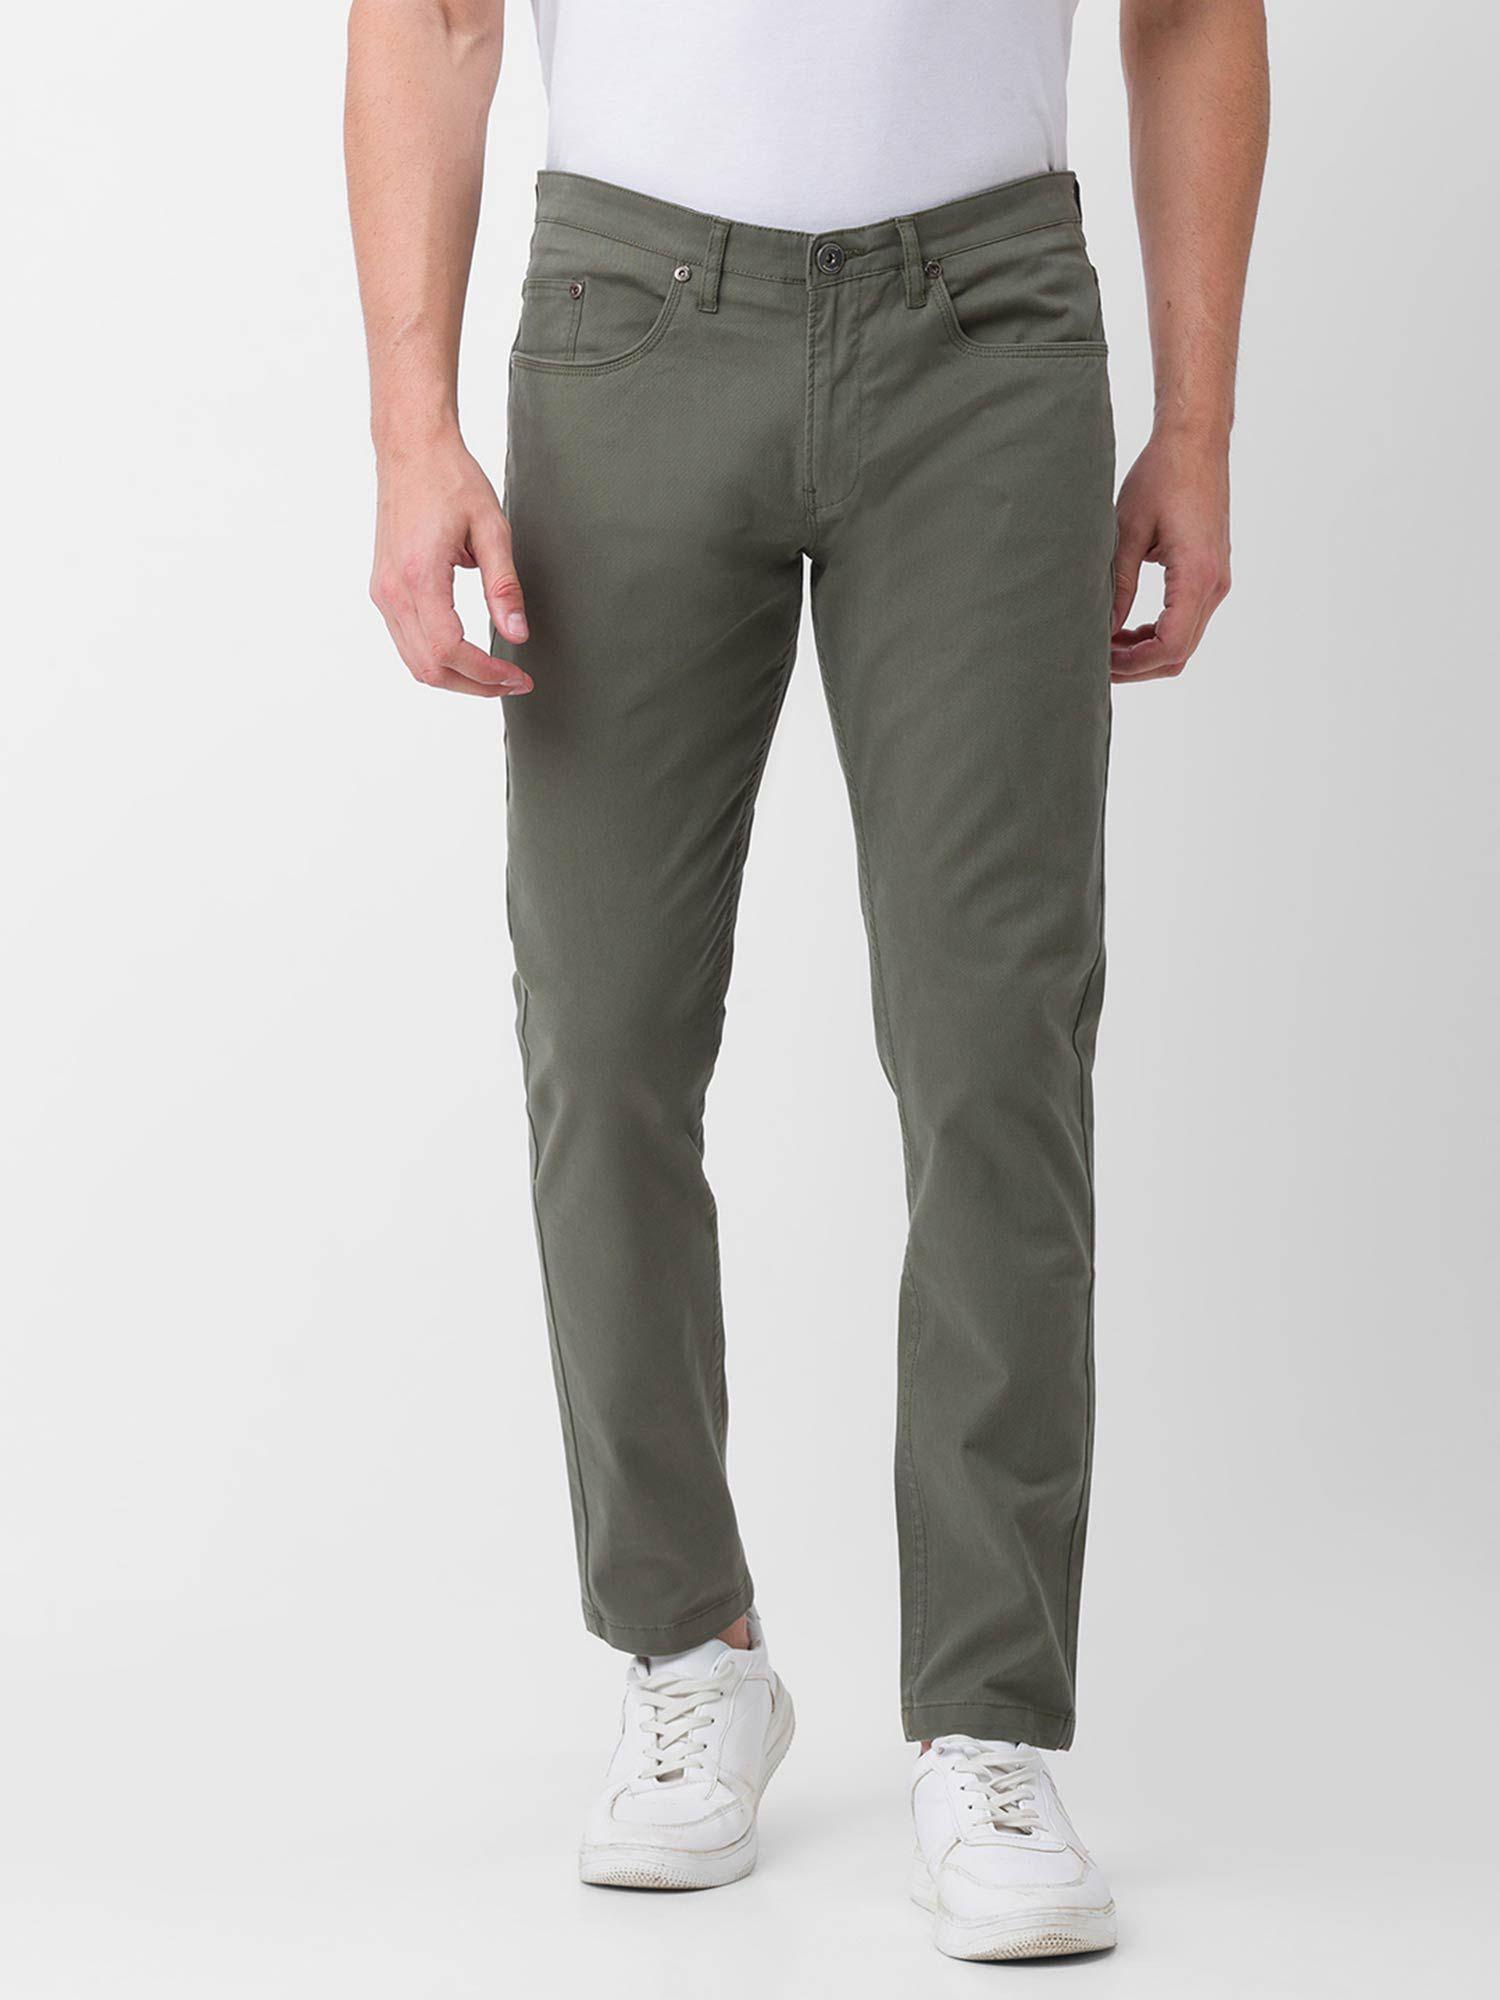 olive-green-cotton-slim-fit-tapered-length-trousers-for-men